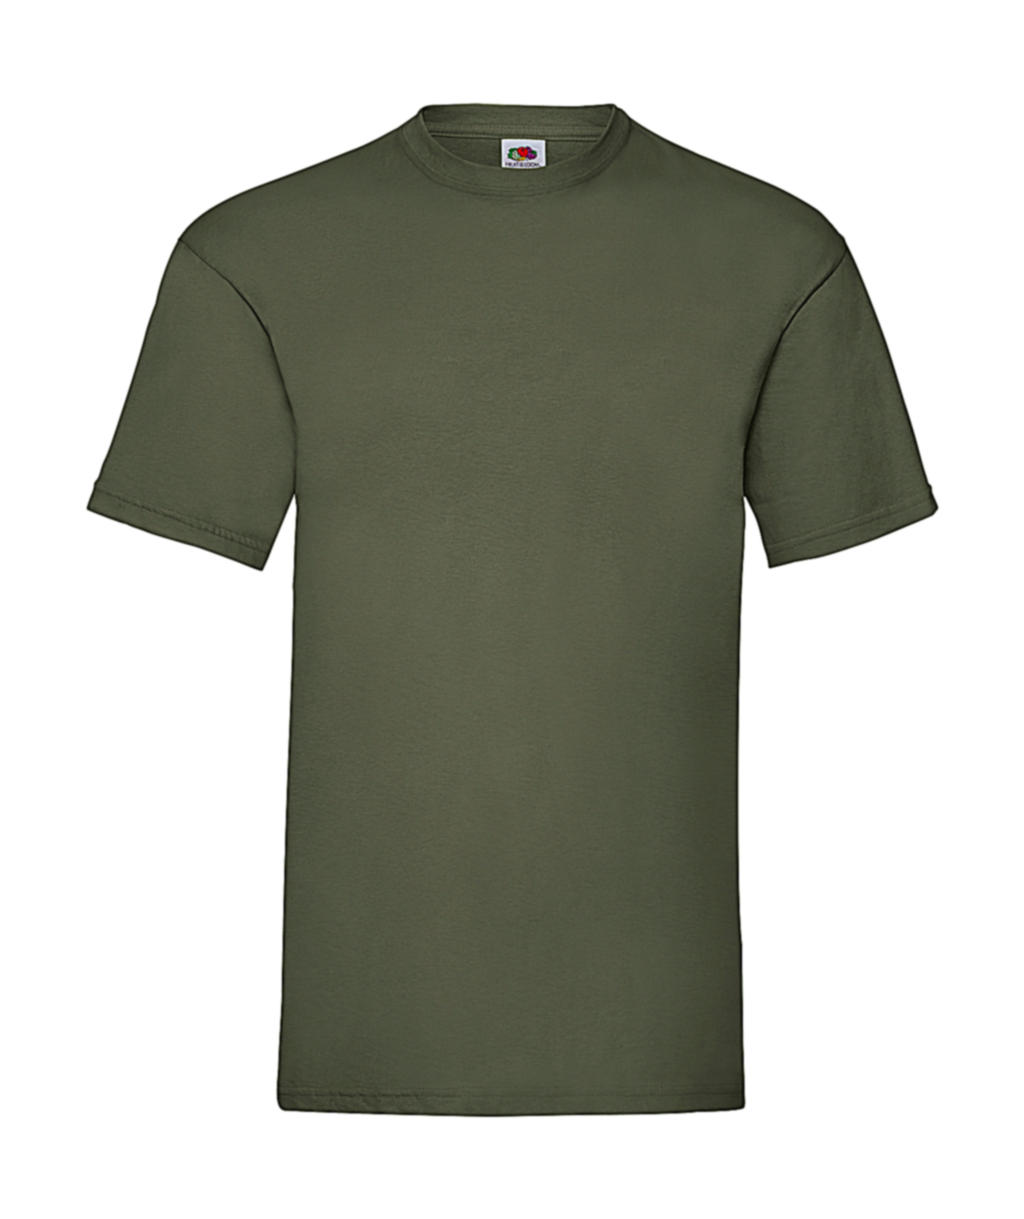  Valueweight Tee in Farbe Classic Olive